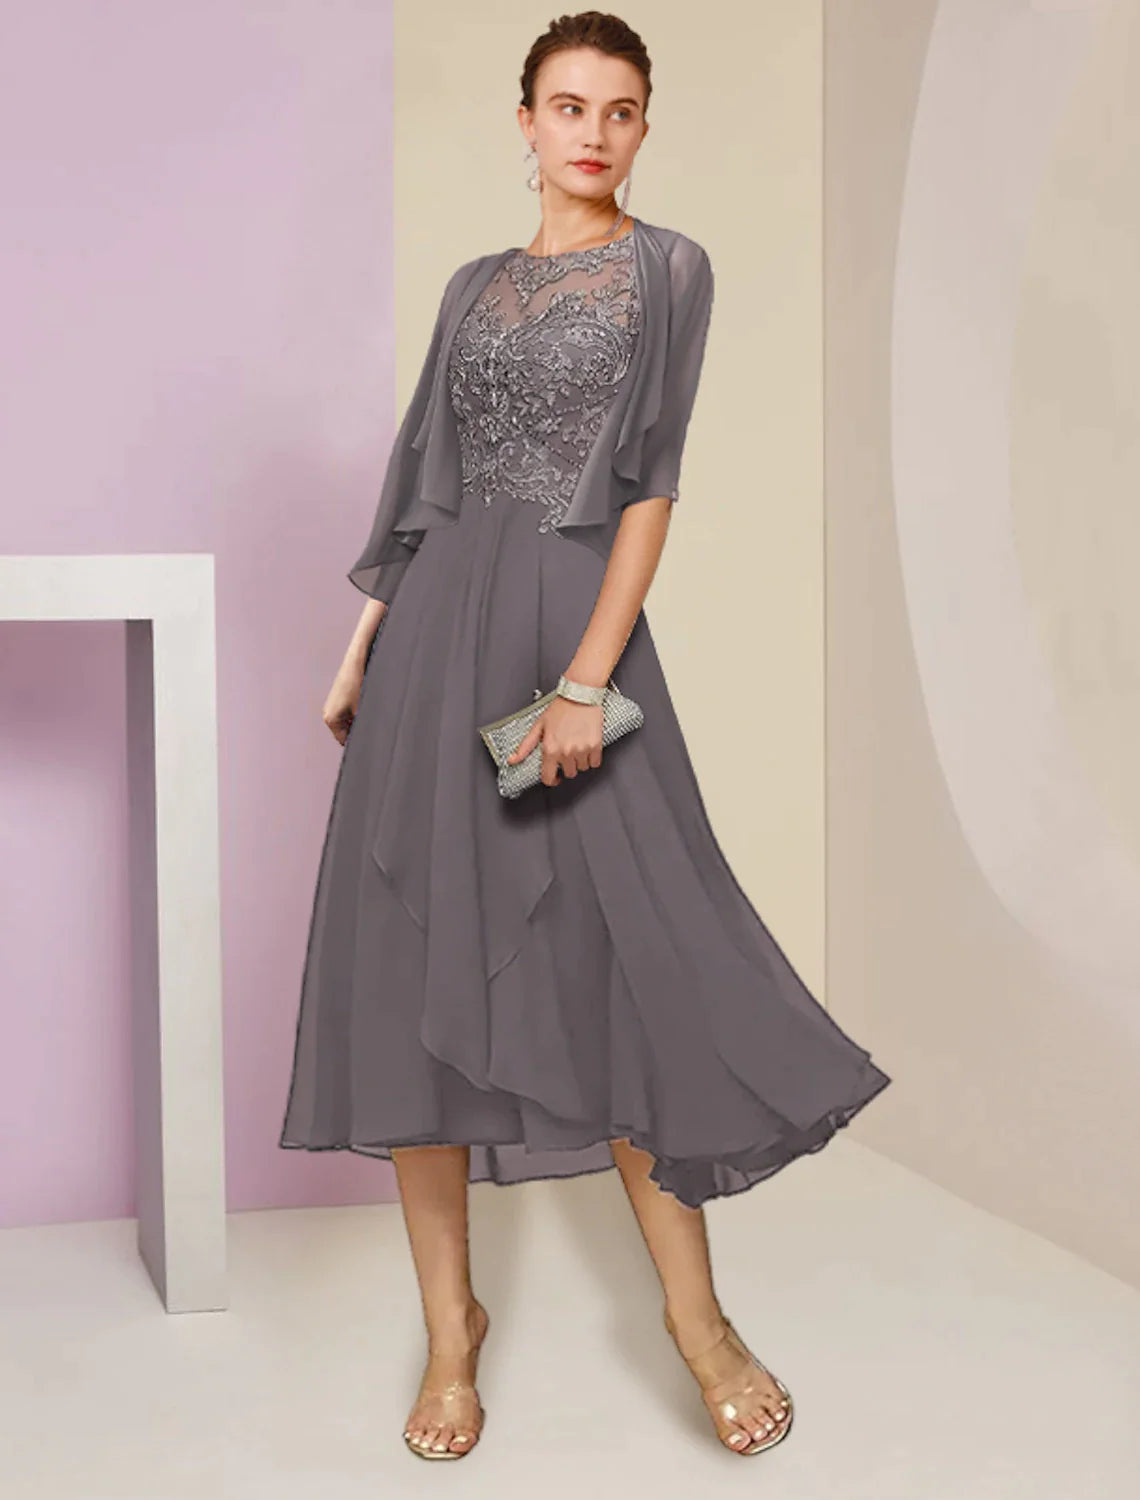 Two Piece A-Line Mother of the Bride Dress Formal Wedding Guest Elegant Scoop Neck Tea Length Chiffon Lace Half Sleeve Wrap Included with Beading Sequin Appliques